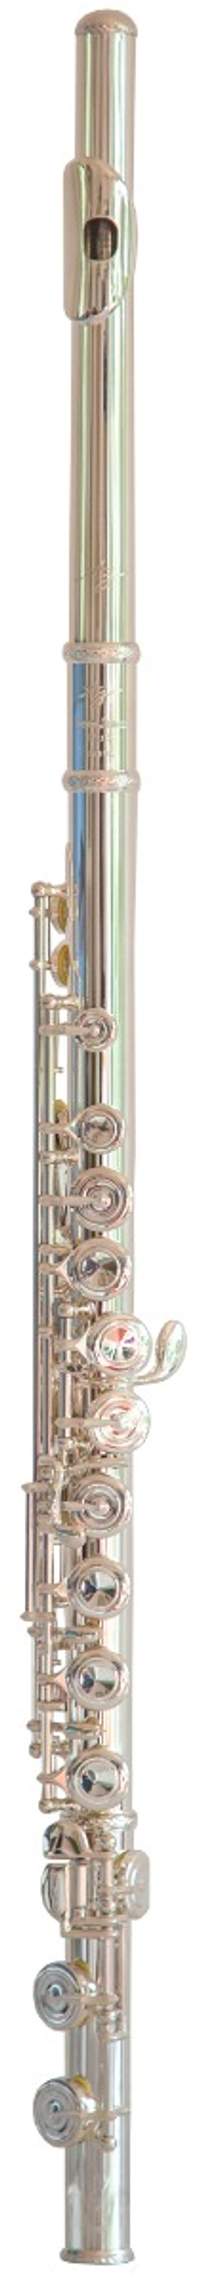 Trevor James 10XP Flute Outfit - CS 925 Silver Lip Plate and Riser